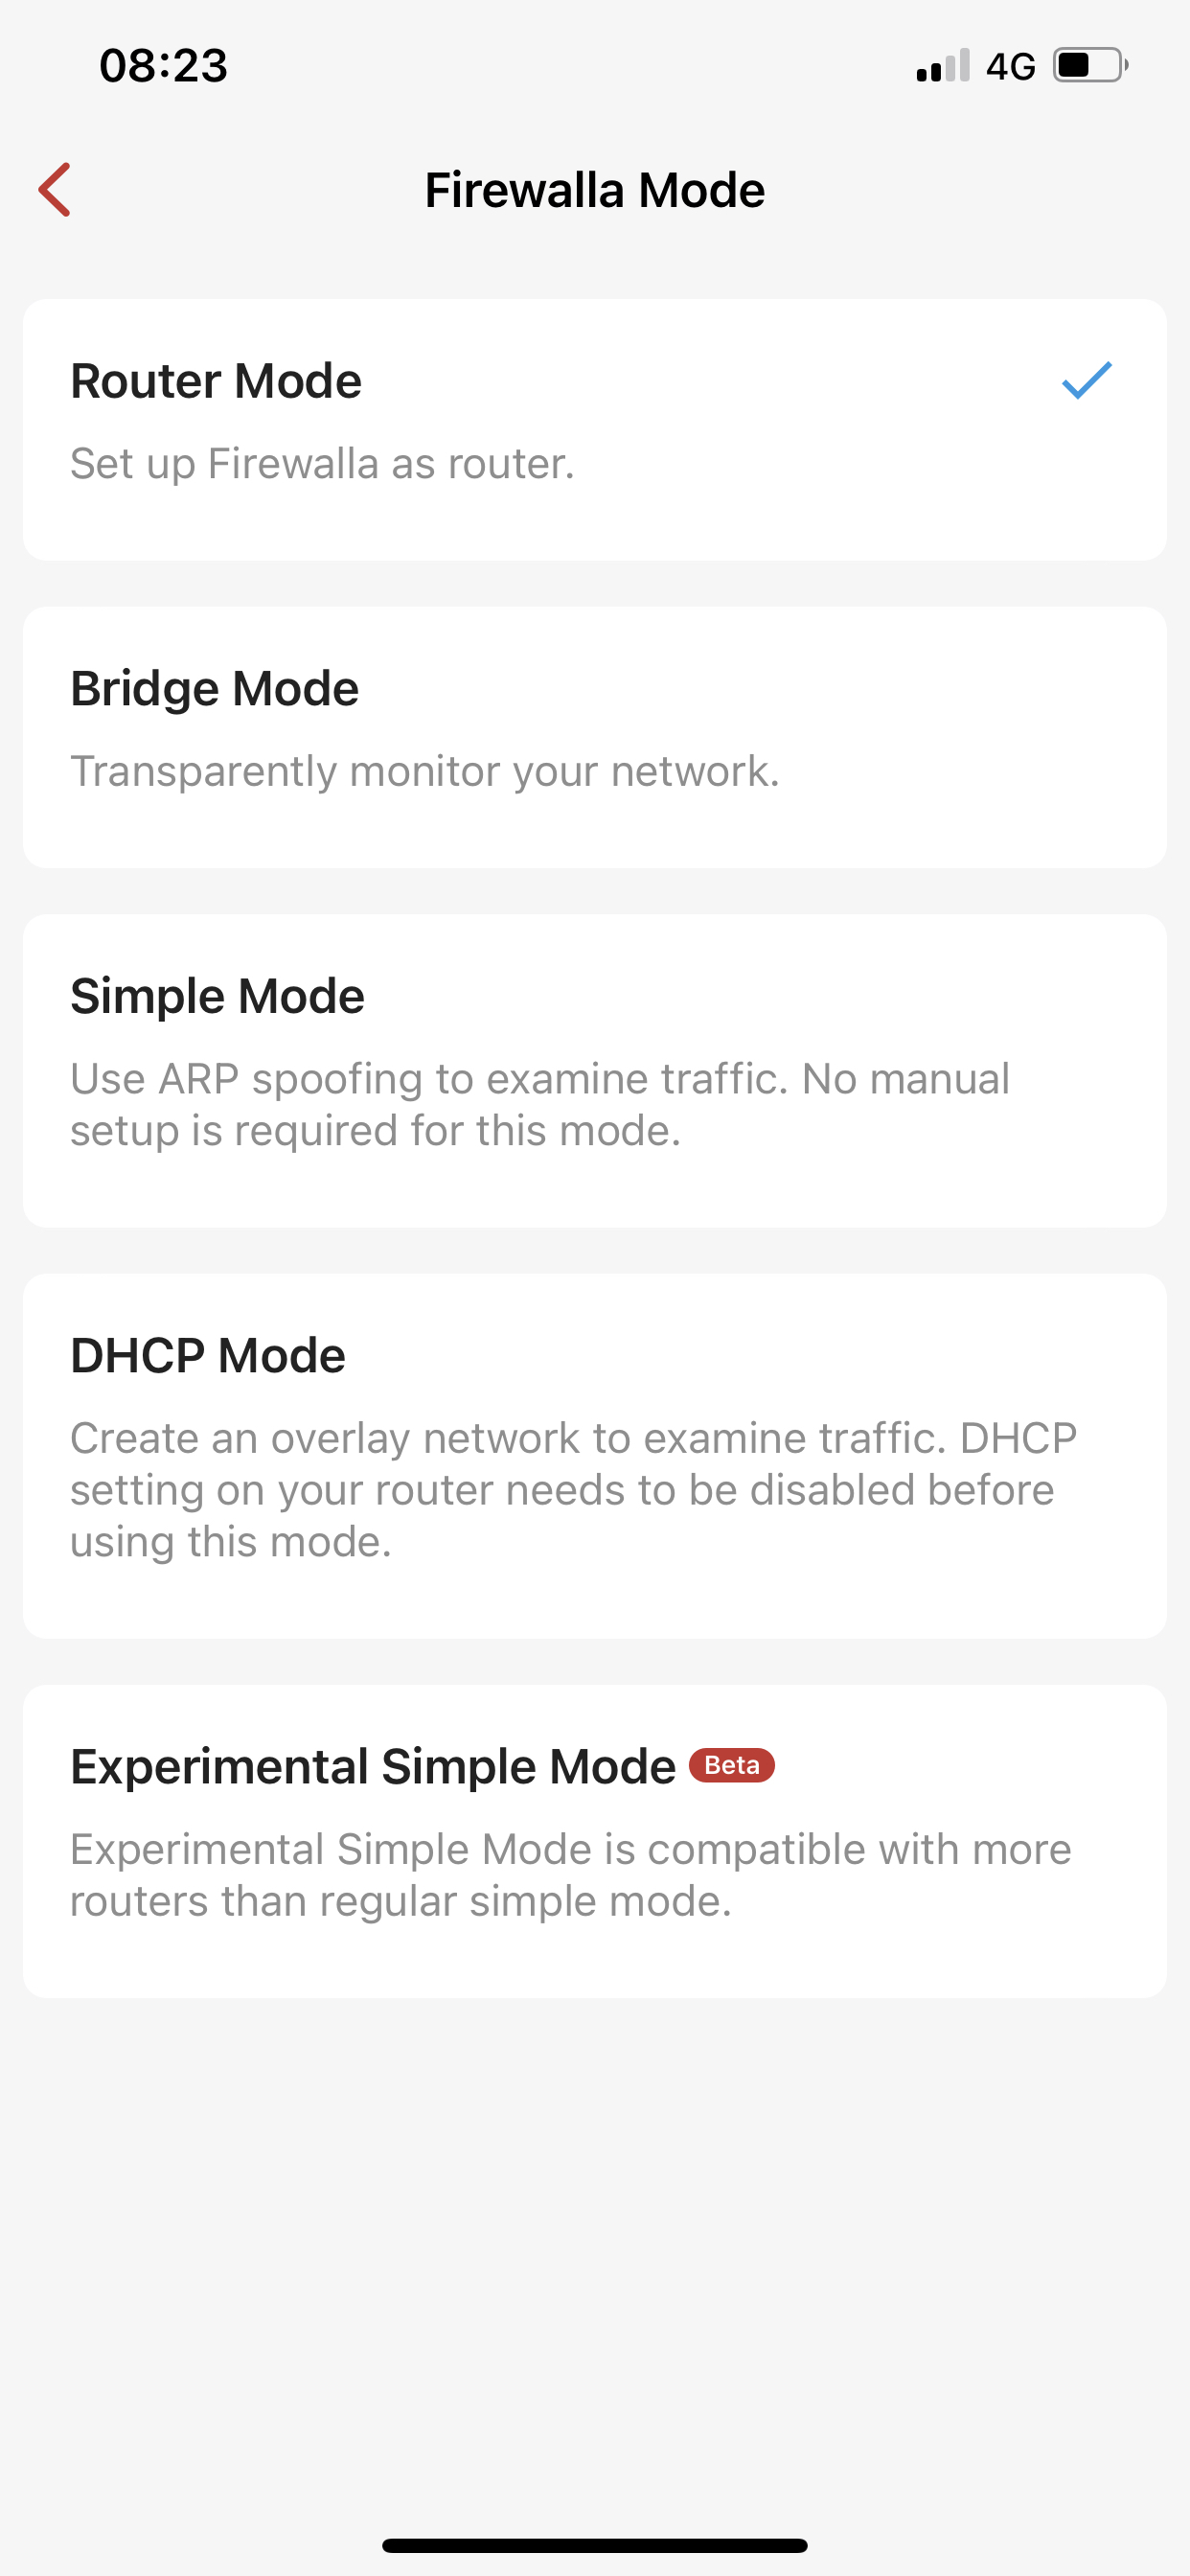 Simple Firewalla mode selections includes Router, Bridge, Simple Mode, and more